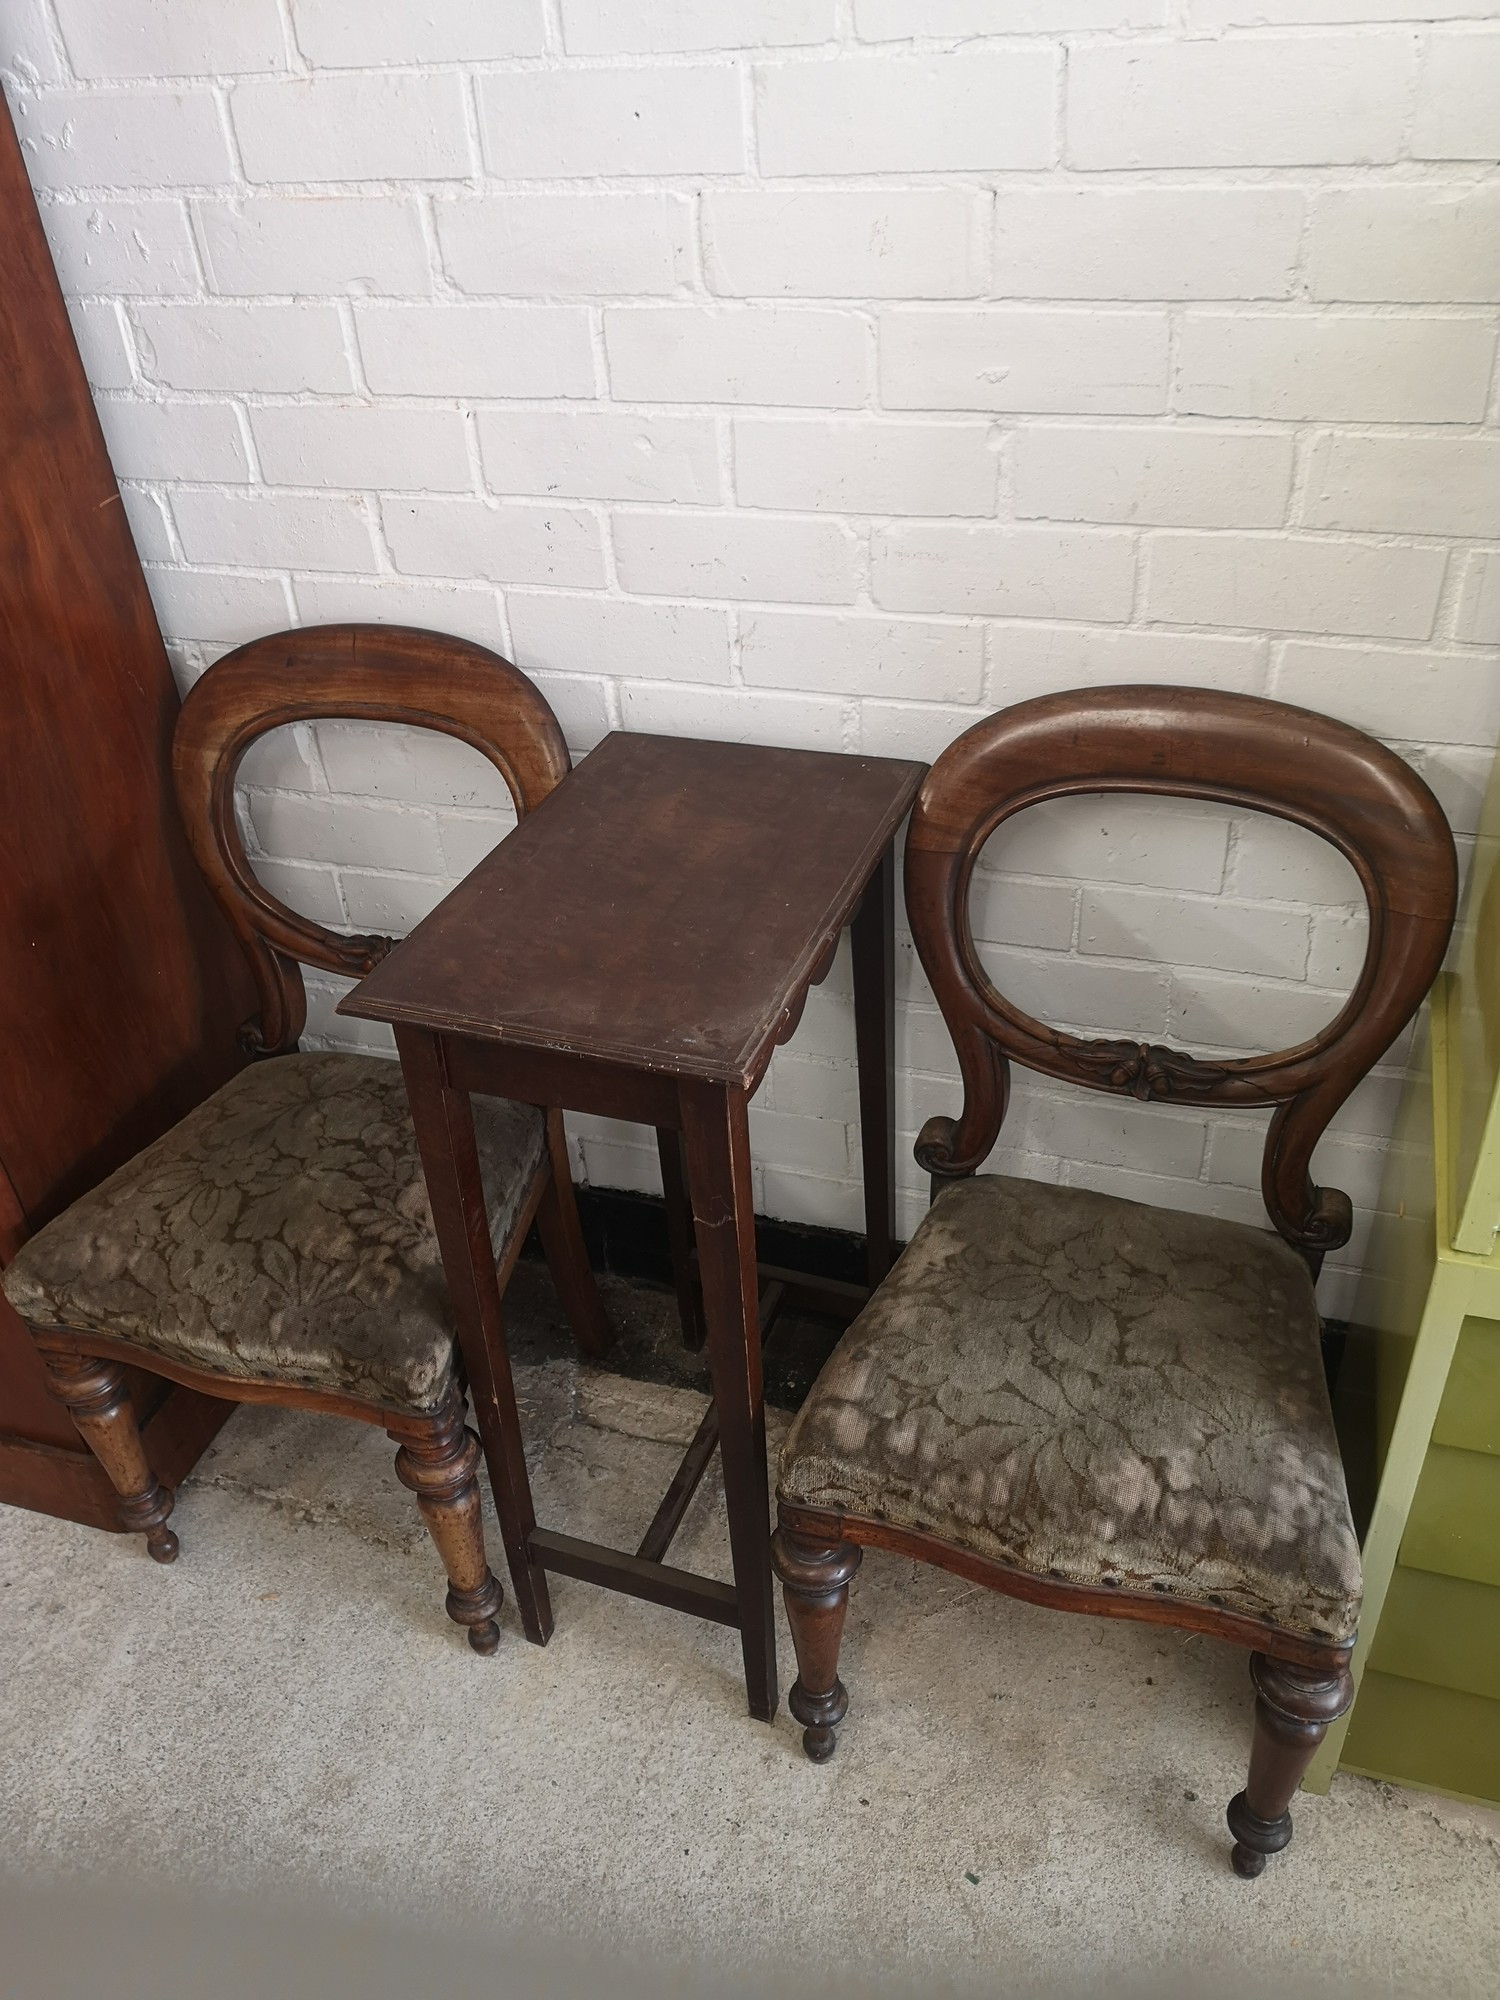 Pair of victorian balloon back chairs with 20th century contemporary table.